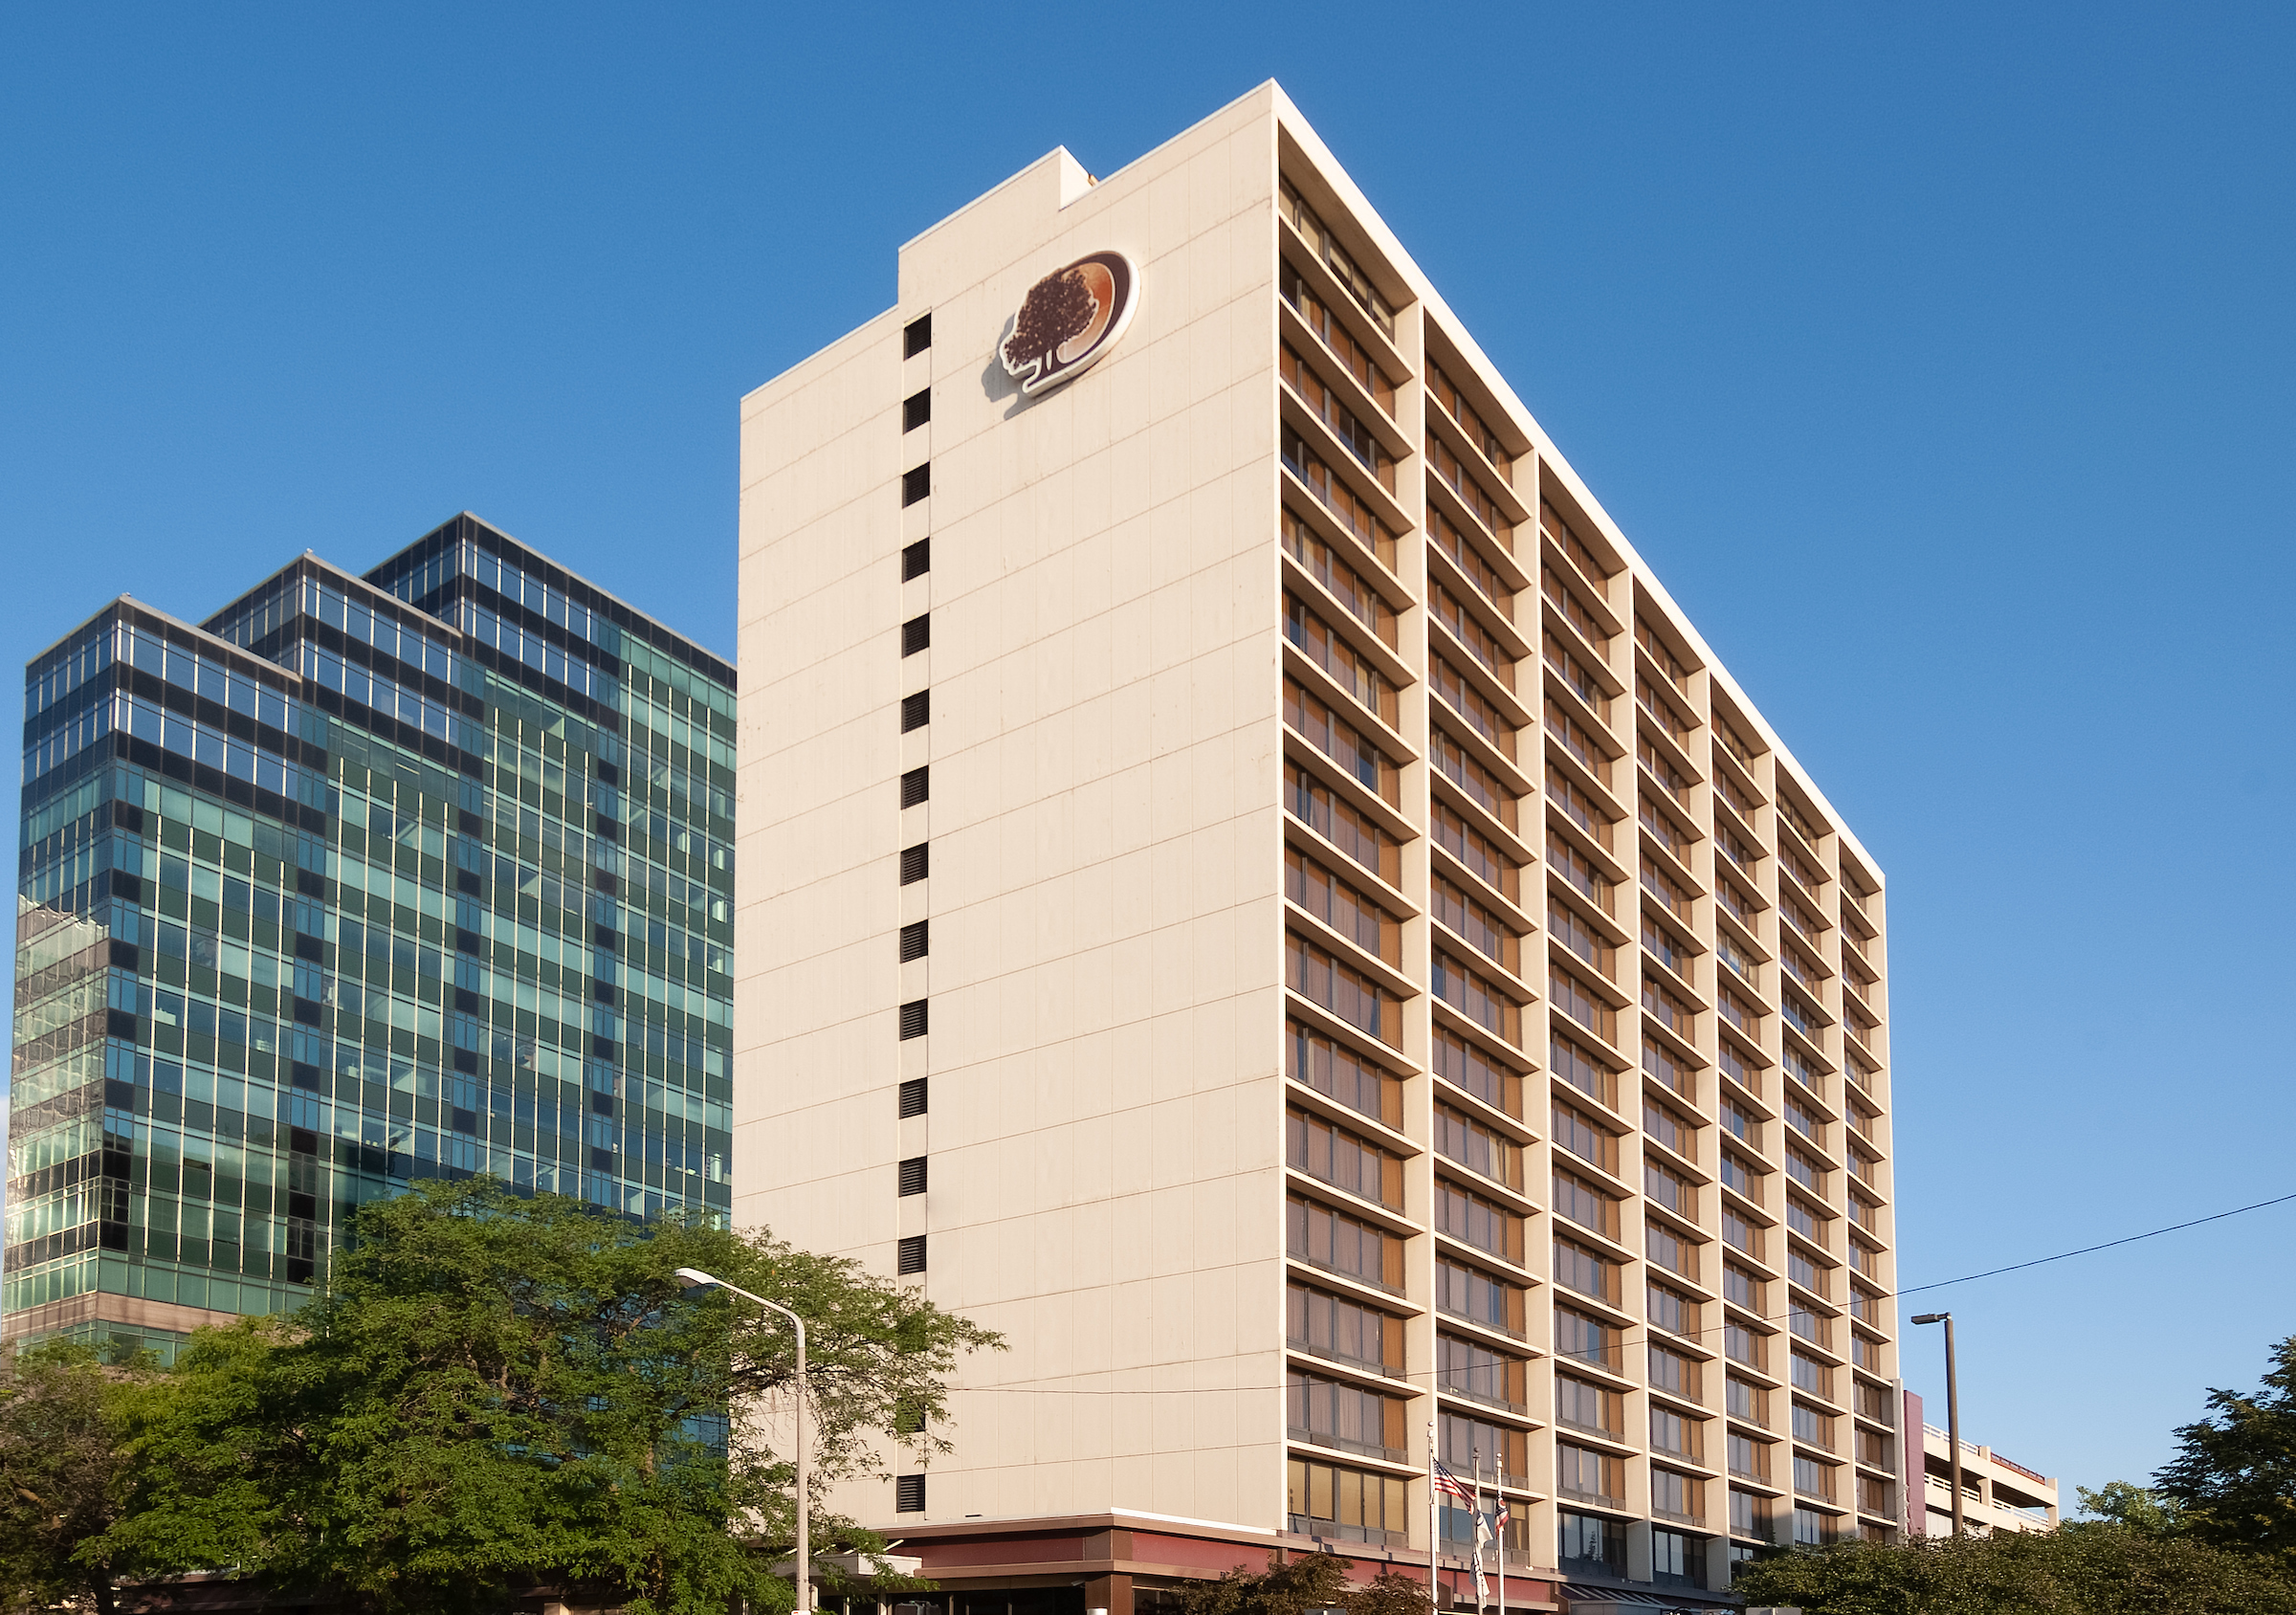 Photo of DoubleTree by Hilton Hotel Cleveland Downtown - Lakeside, Cleveland, OH